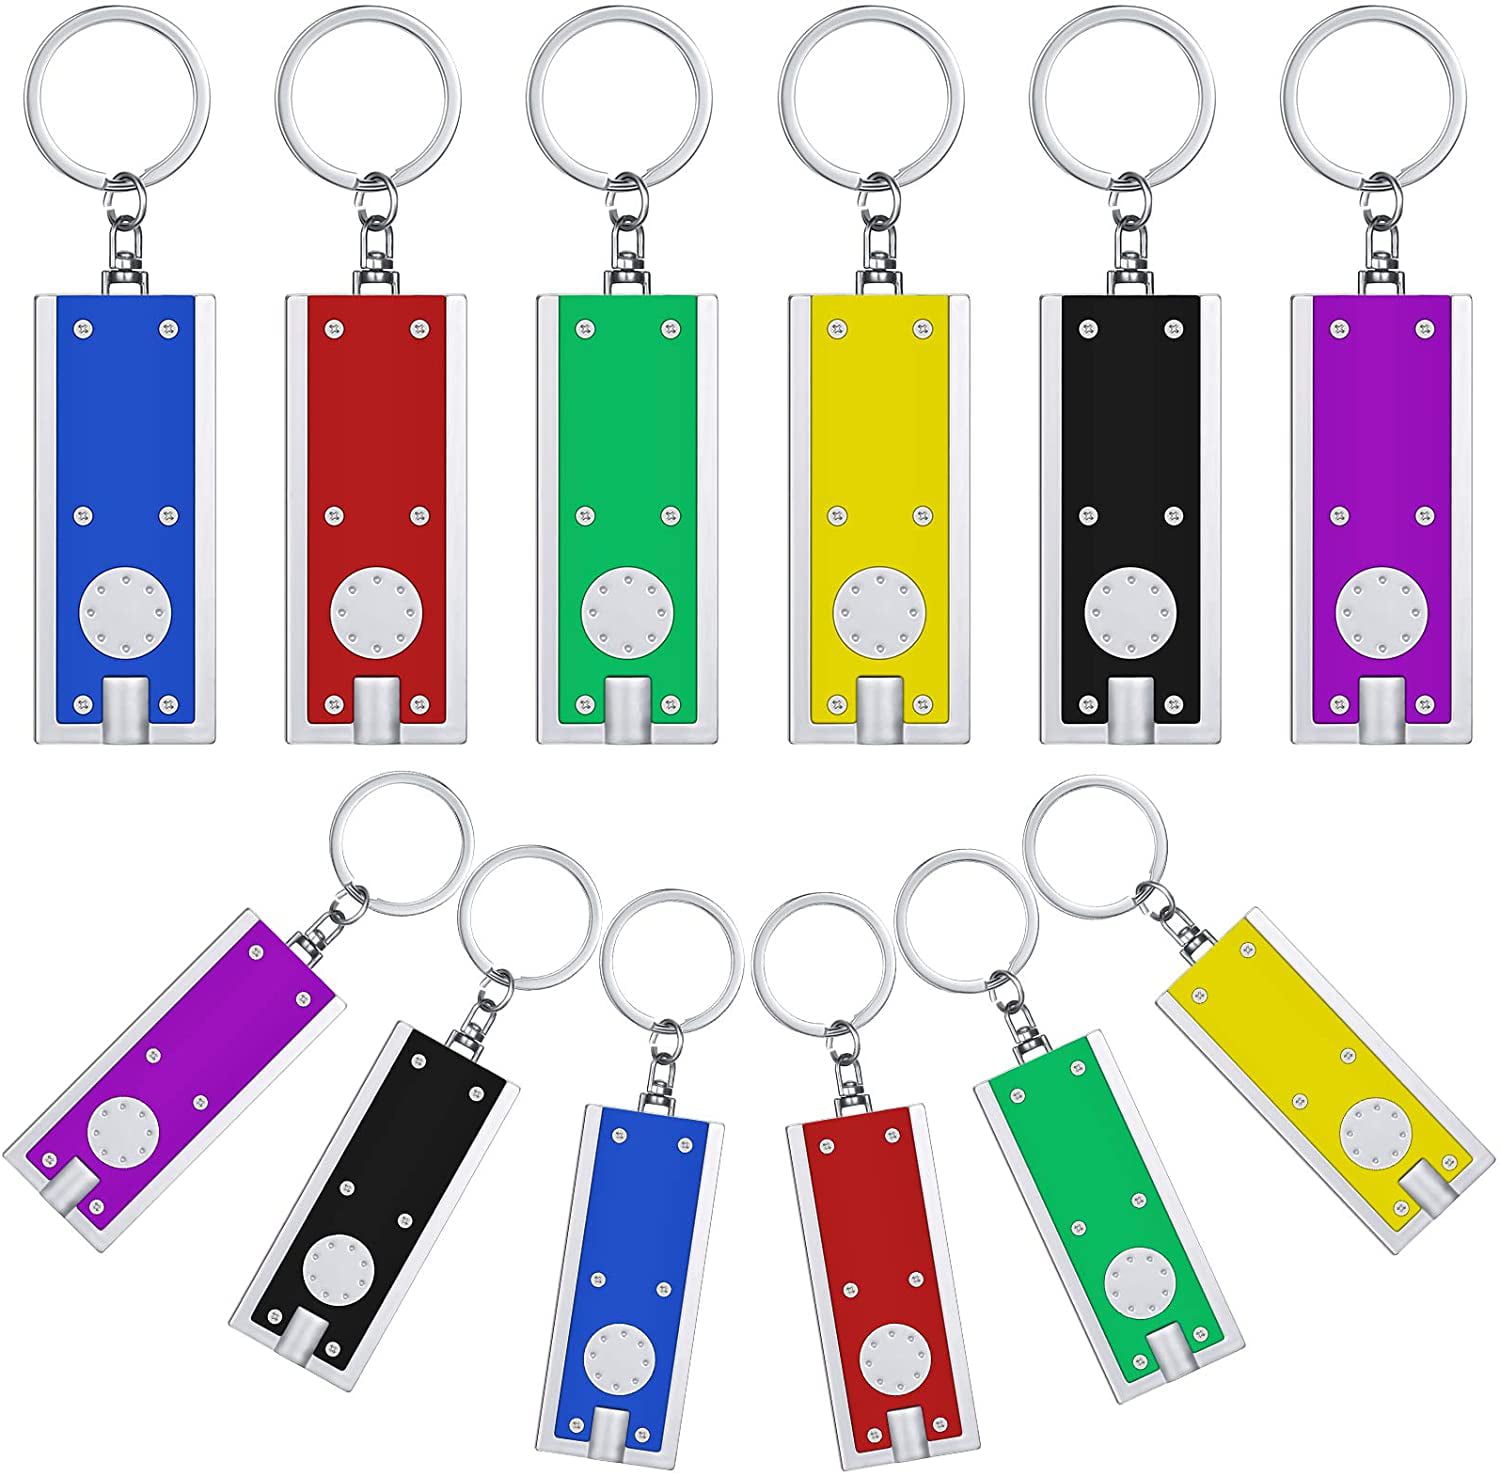 D795 Mini LED Key Light Ring White Flashlight Camping Outdoor Keychain Torch 